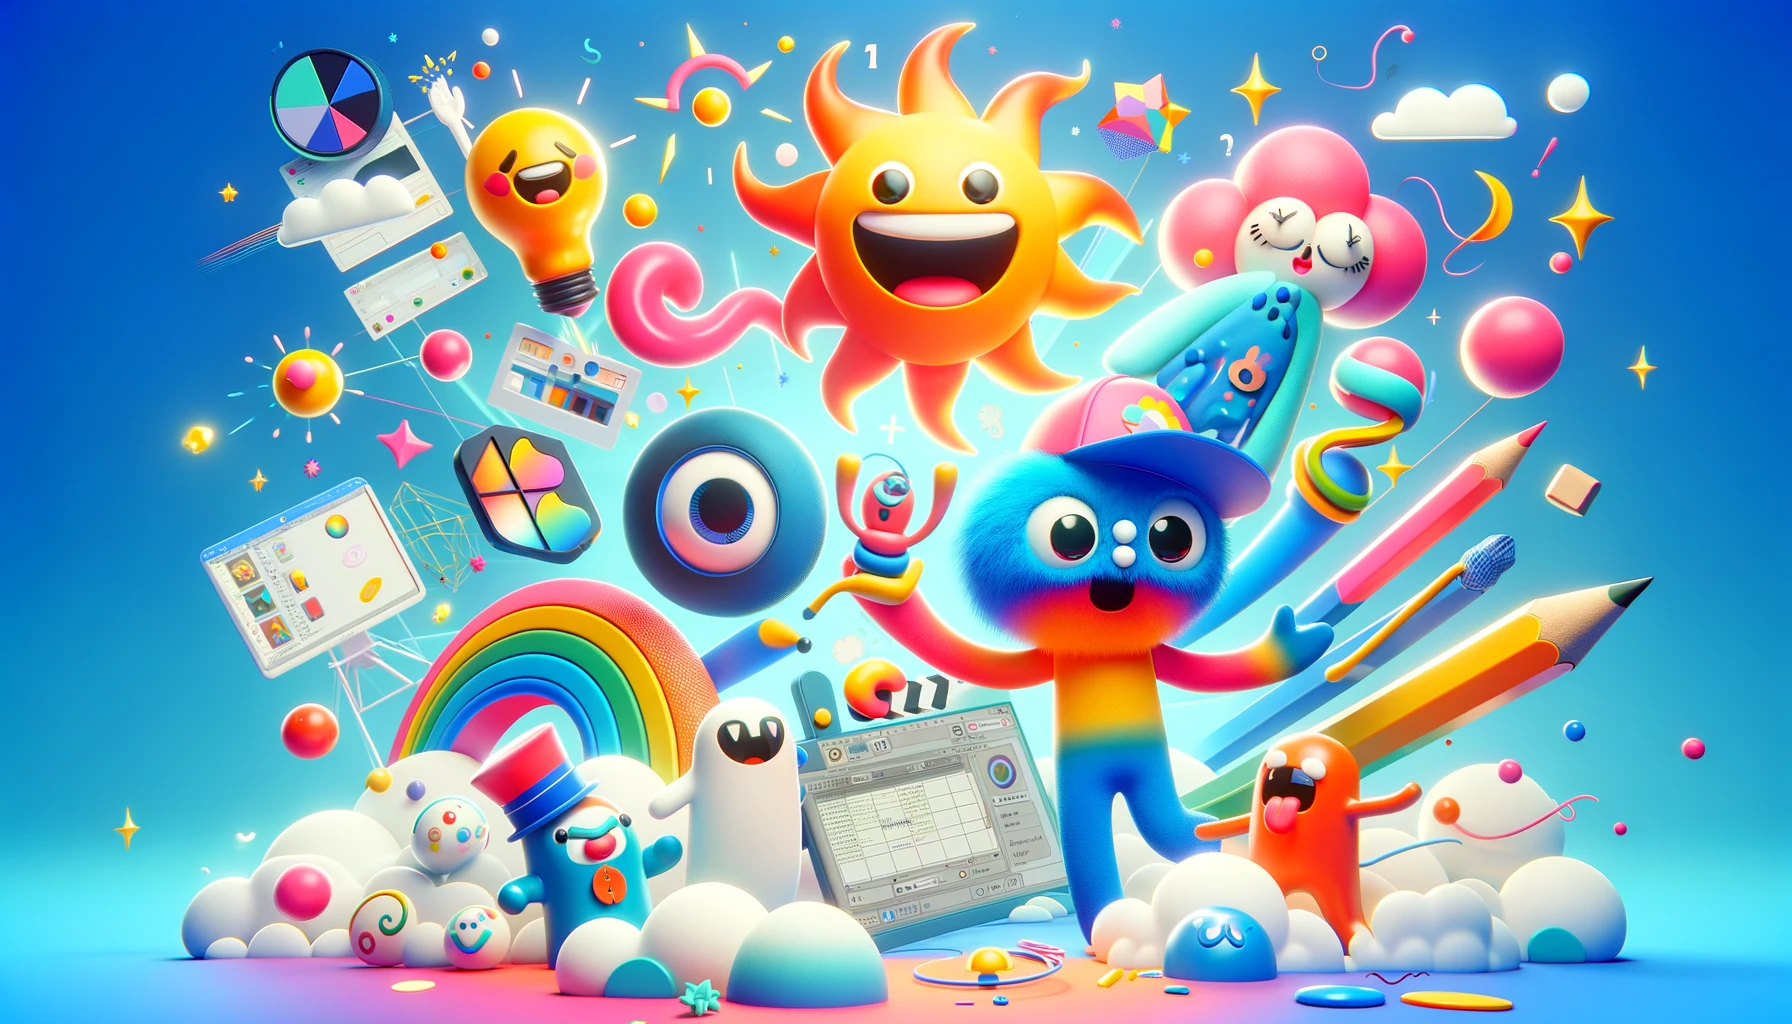 Whimsical character created in Blender, surrounded by colorful lighting effects and playful textures in a cartoon-style environment.